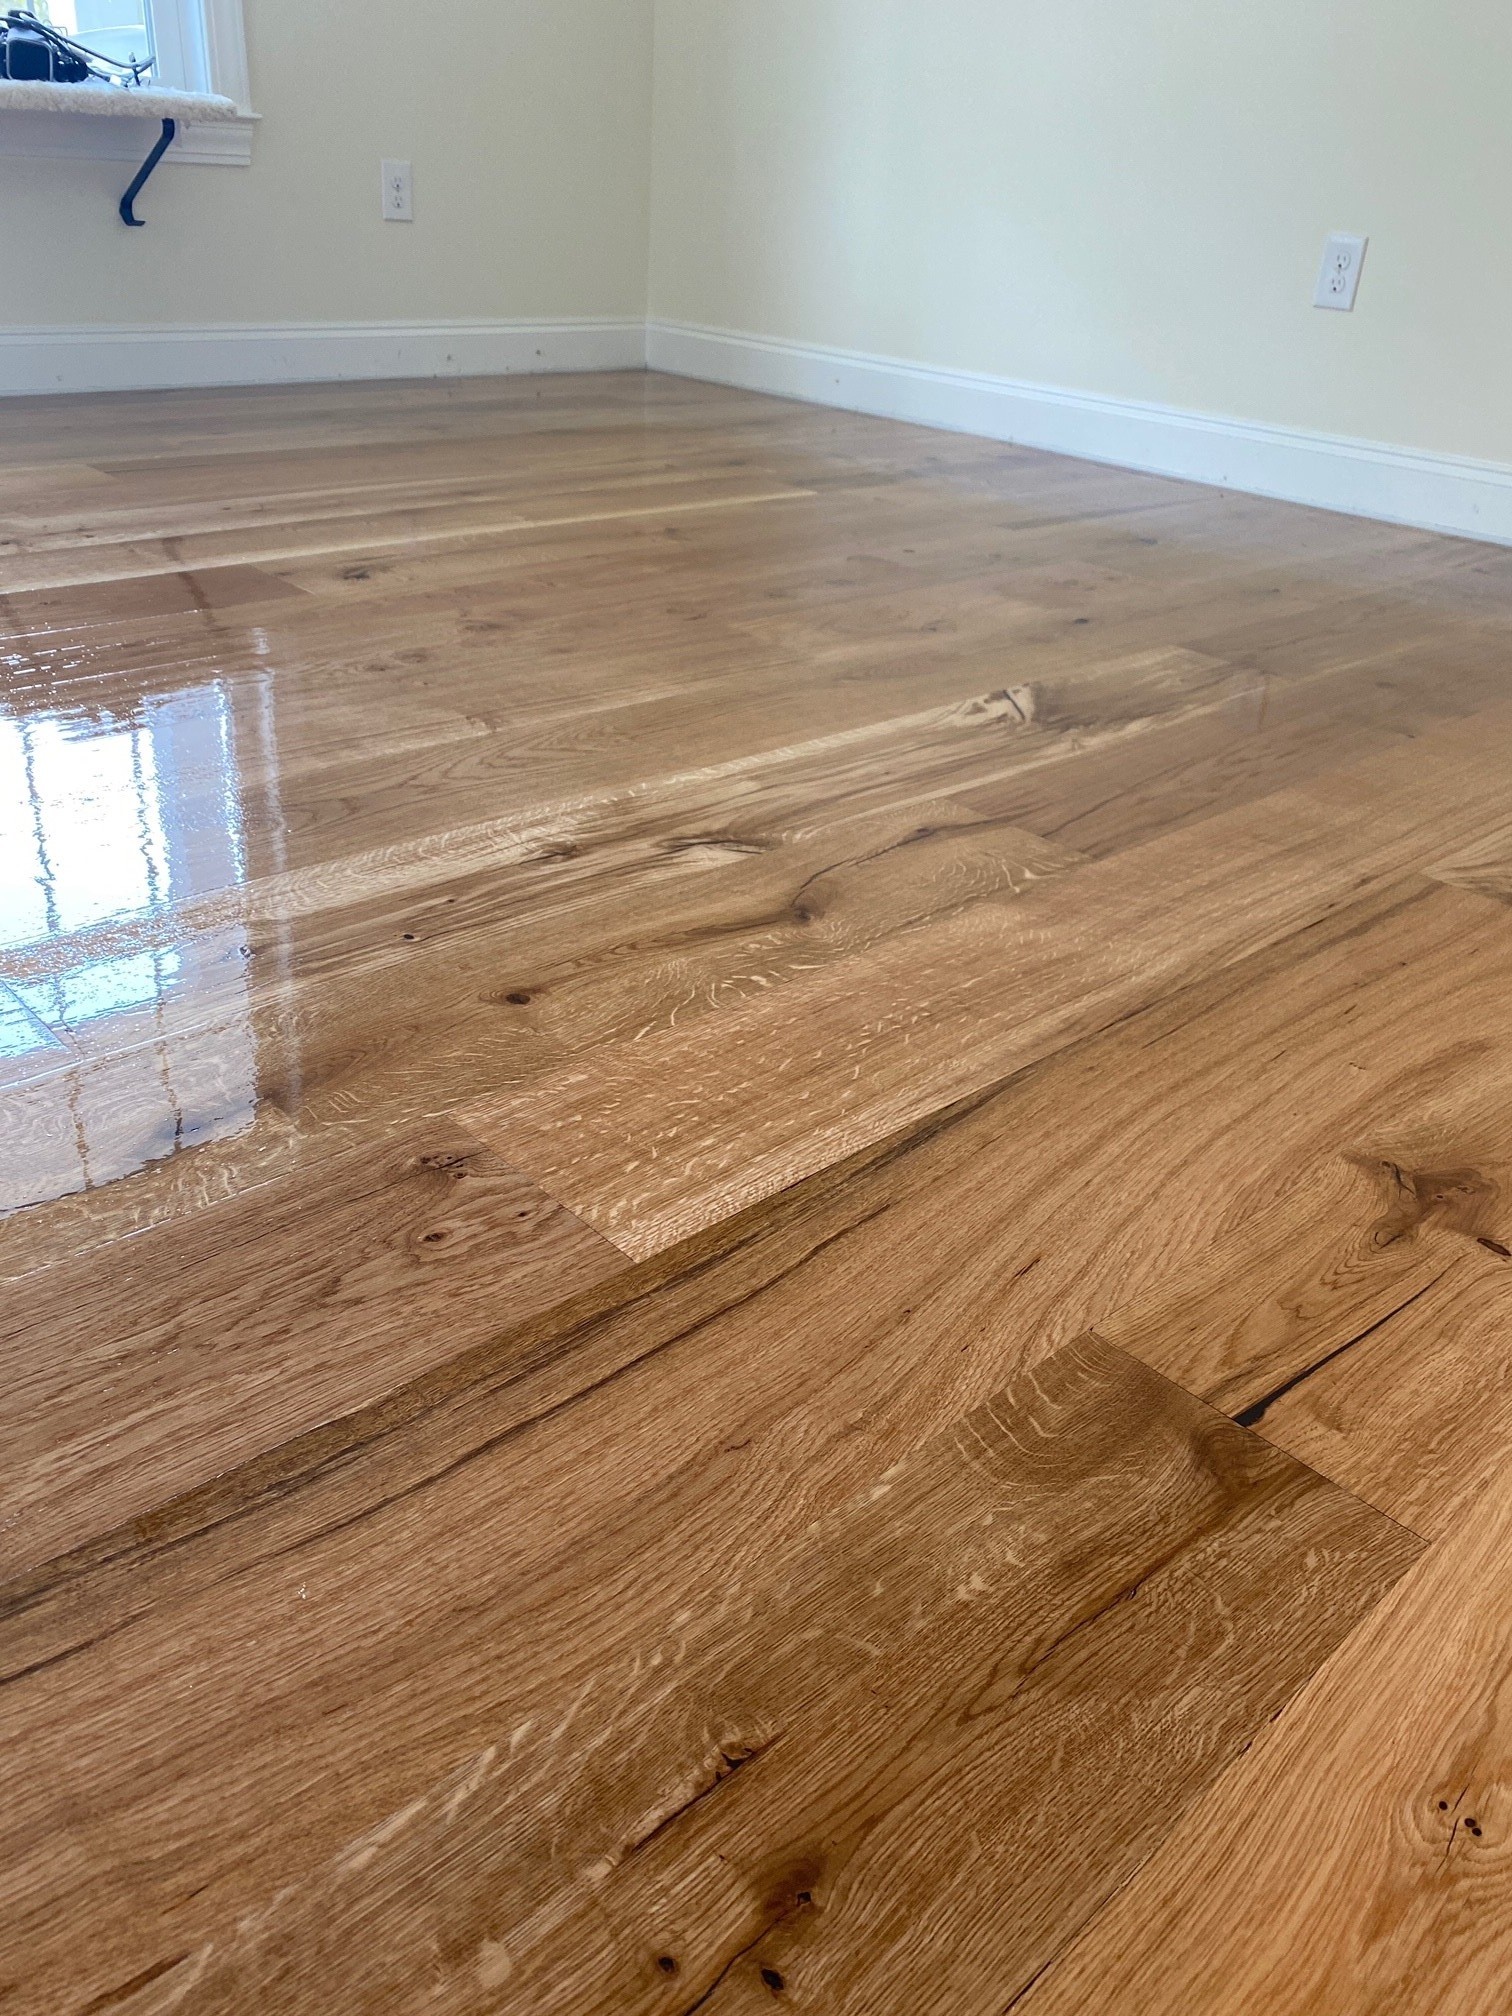 Unfinished Wood Flooring, Cost Of Prefinished Hardwood Flooring Vs Unfinished